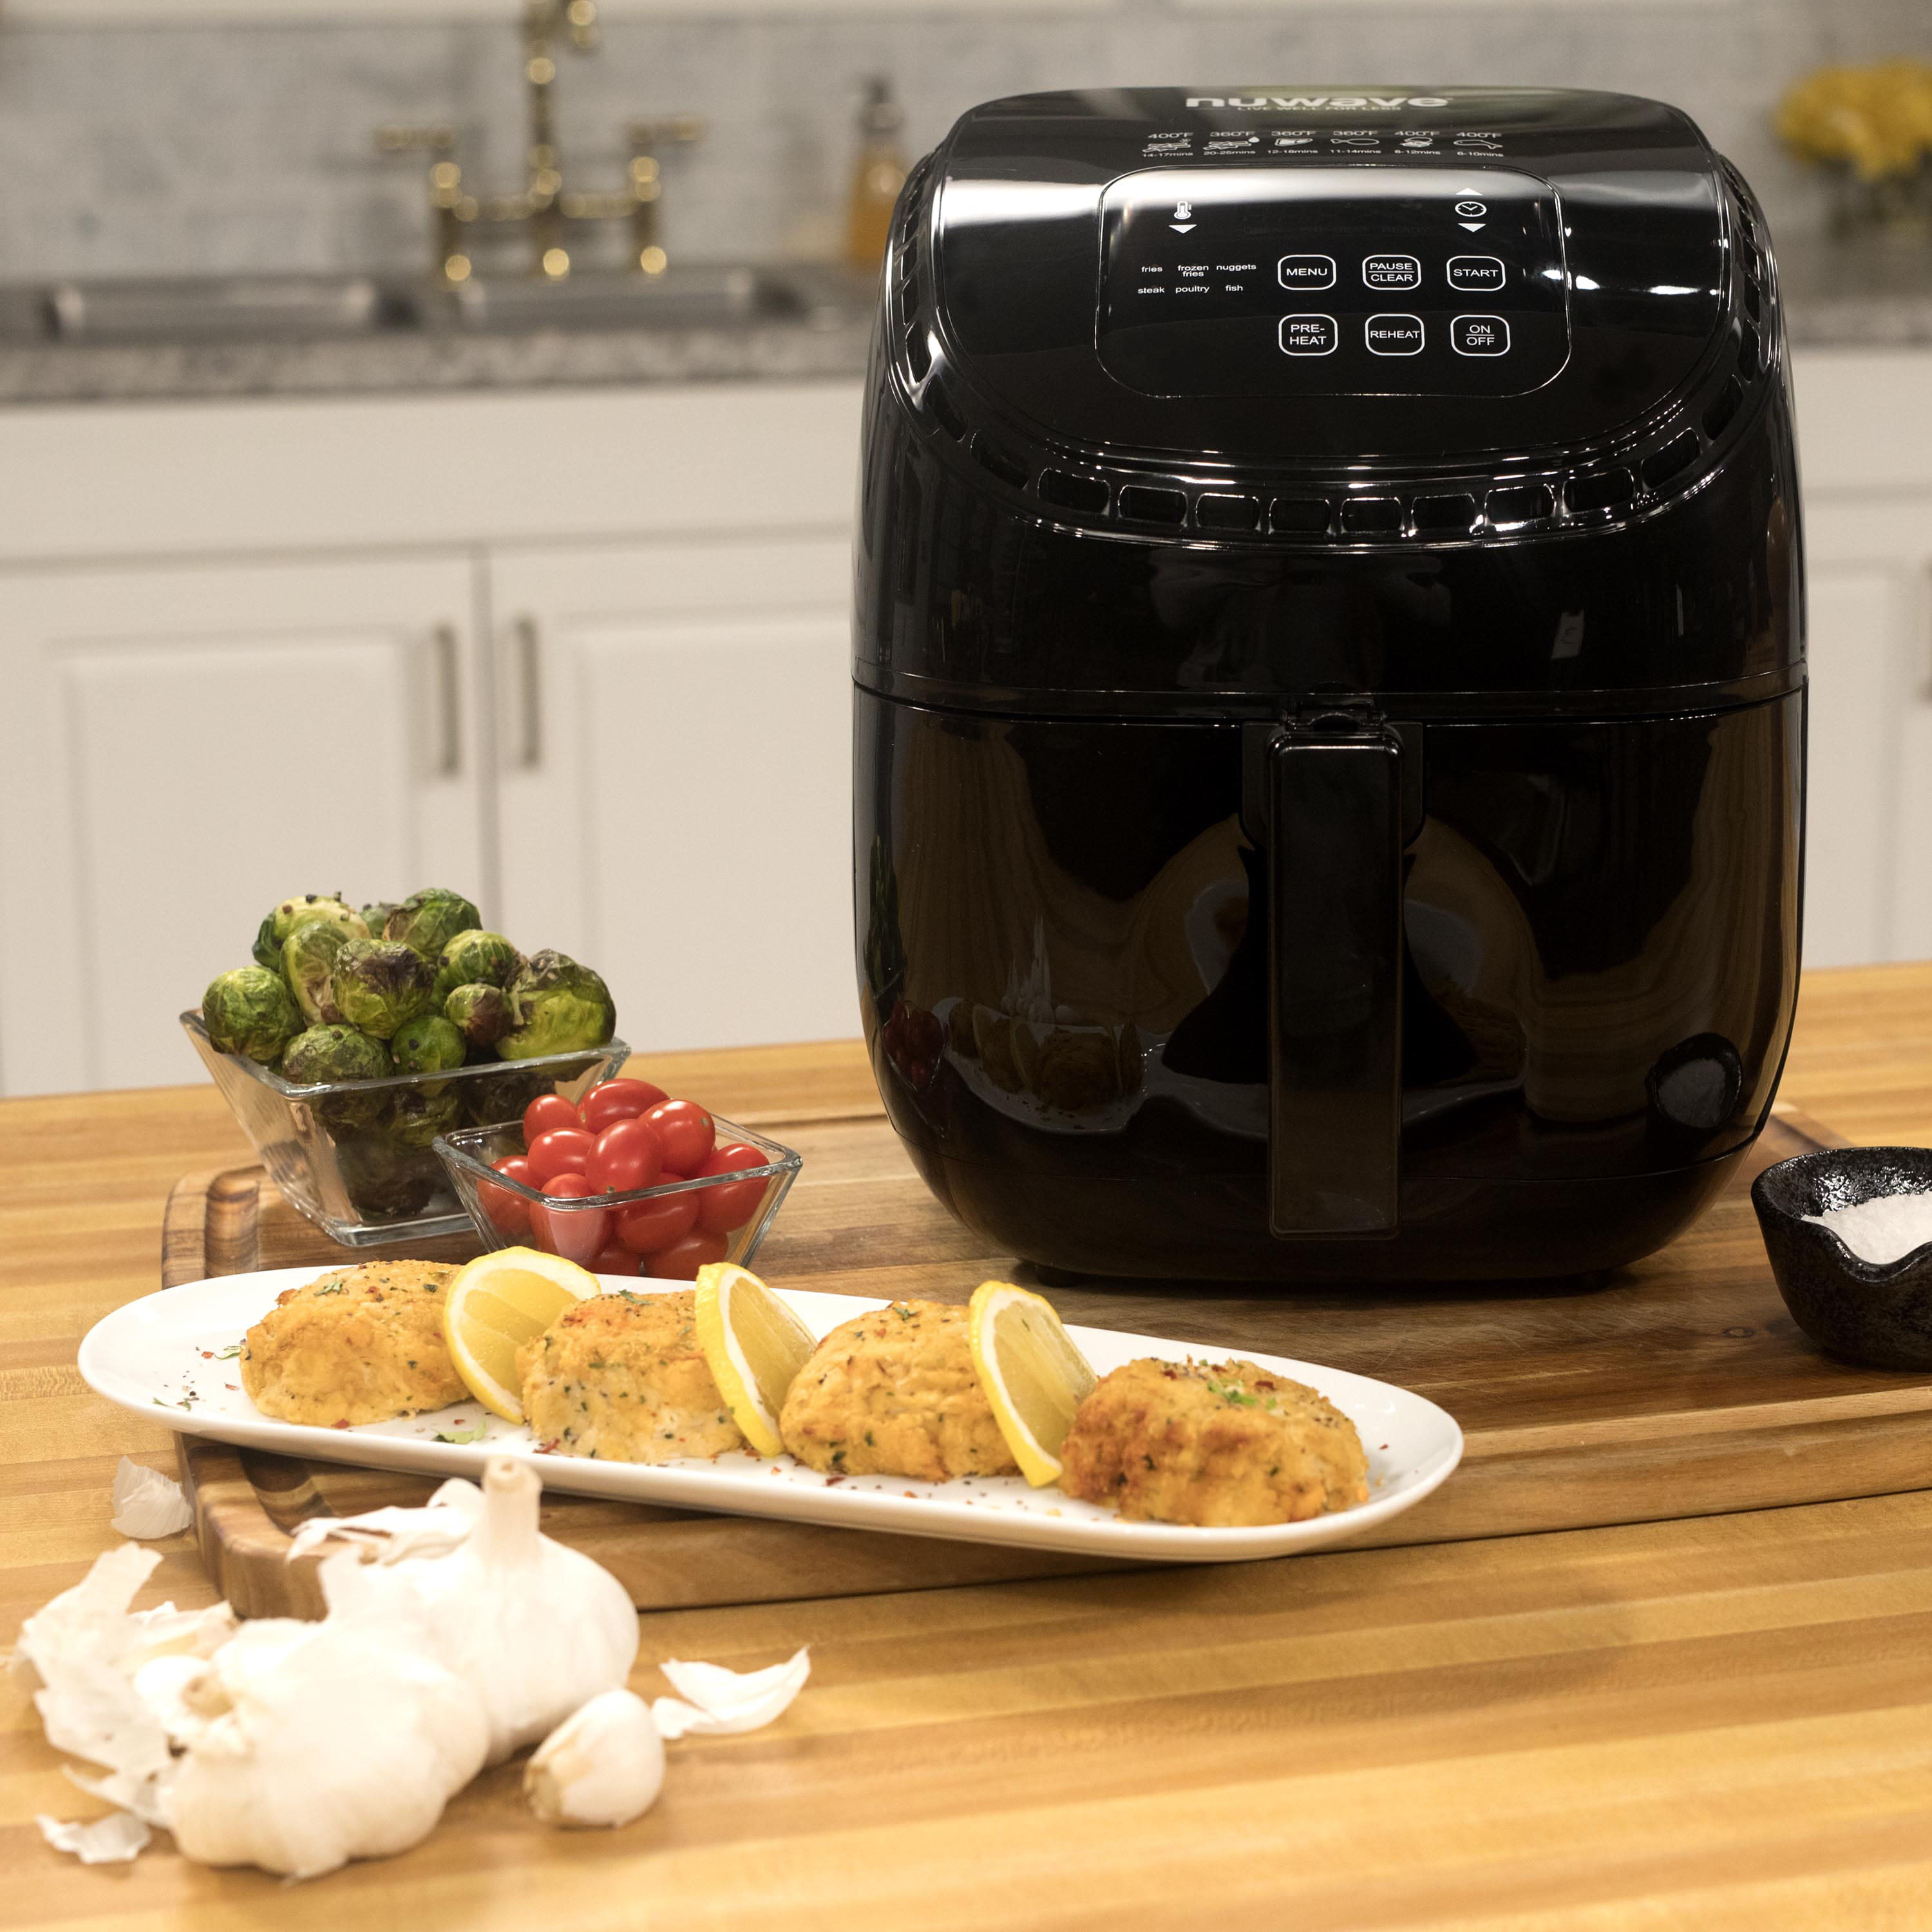 also includes non-stick baking pan and s recipe book precise temperature control and advanced functions like PREHEAT REHEAT and more wattage control NUWAVE BRIO 3-Quart Digital Air Fryer cooking package with one-touch digital controls 6 easy presets 